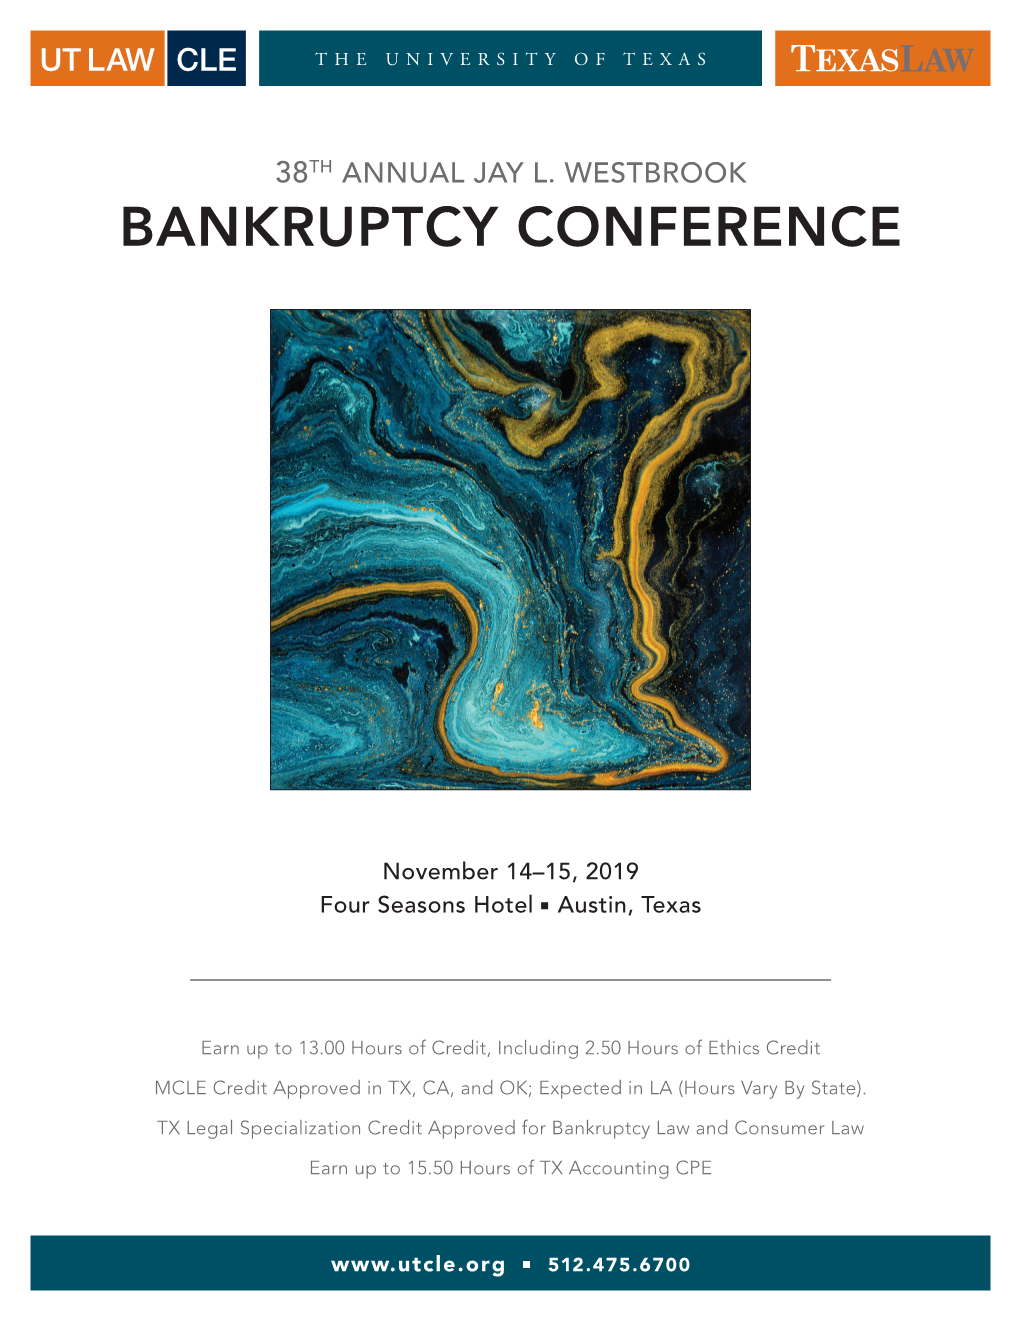 Bankruptcy Conference